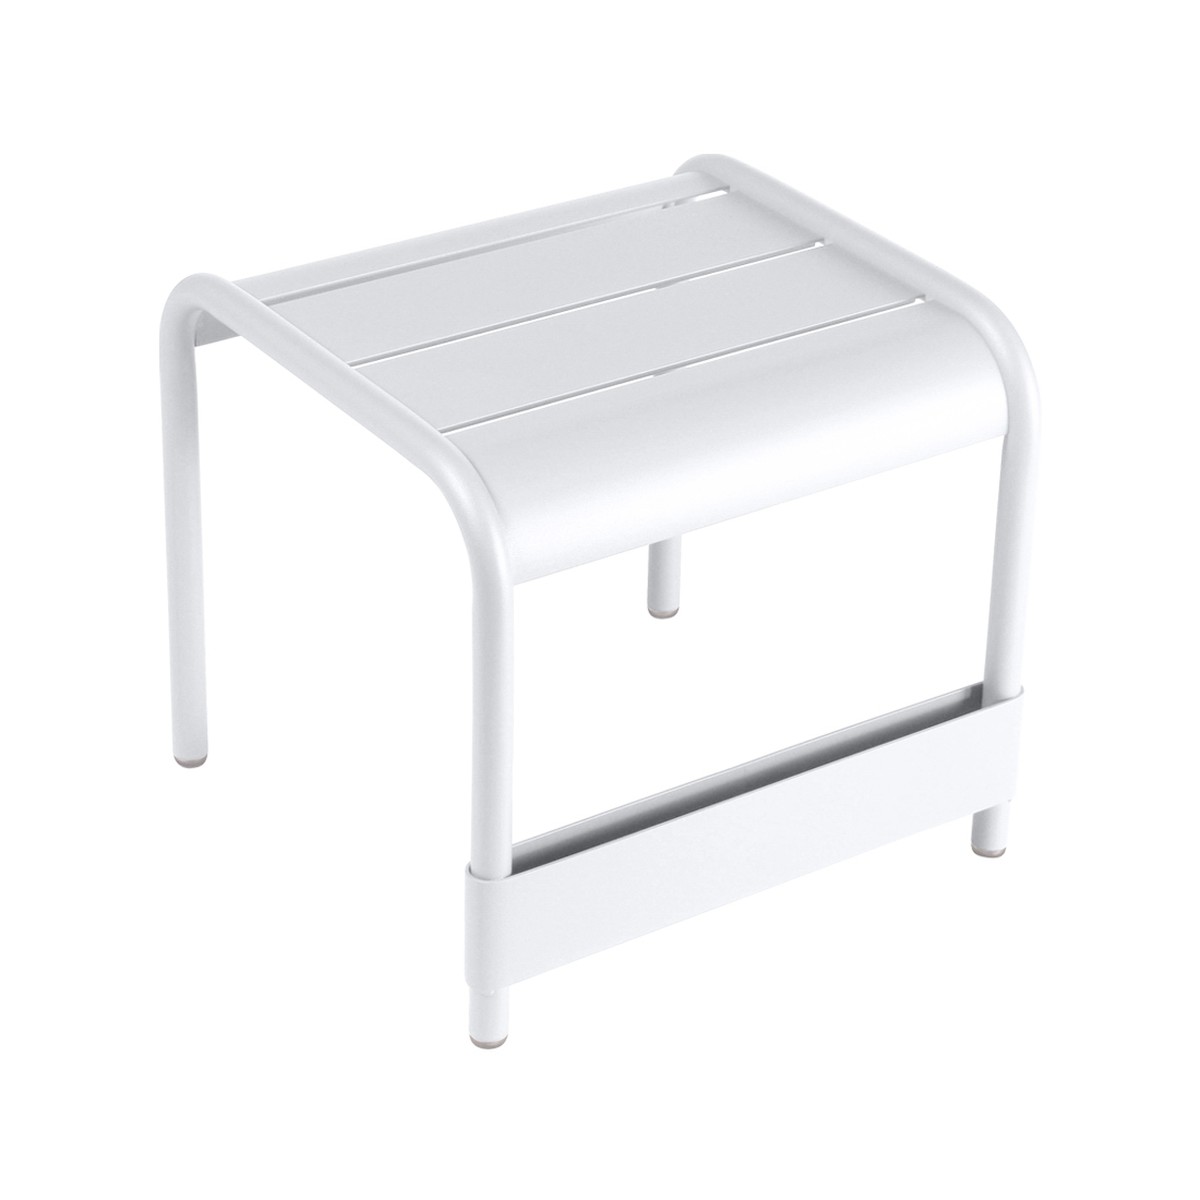 Fermob Luxembourg Table basse Luxembourg petite Blanc L 43 x l 42 x H40cm